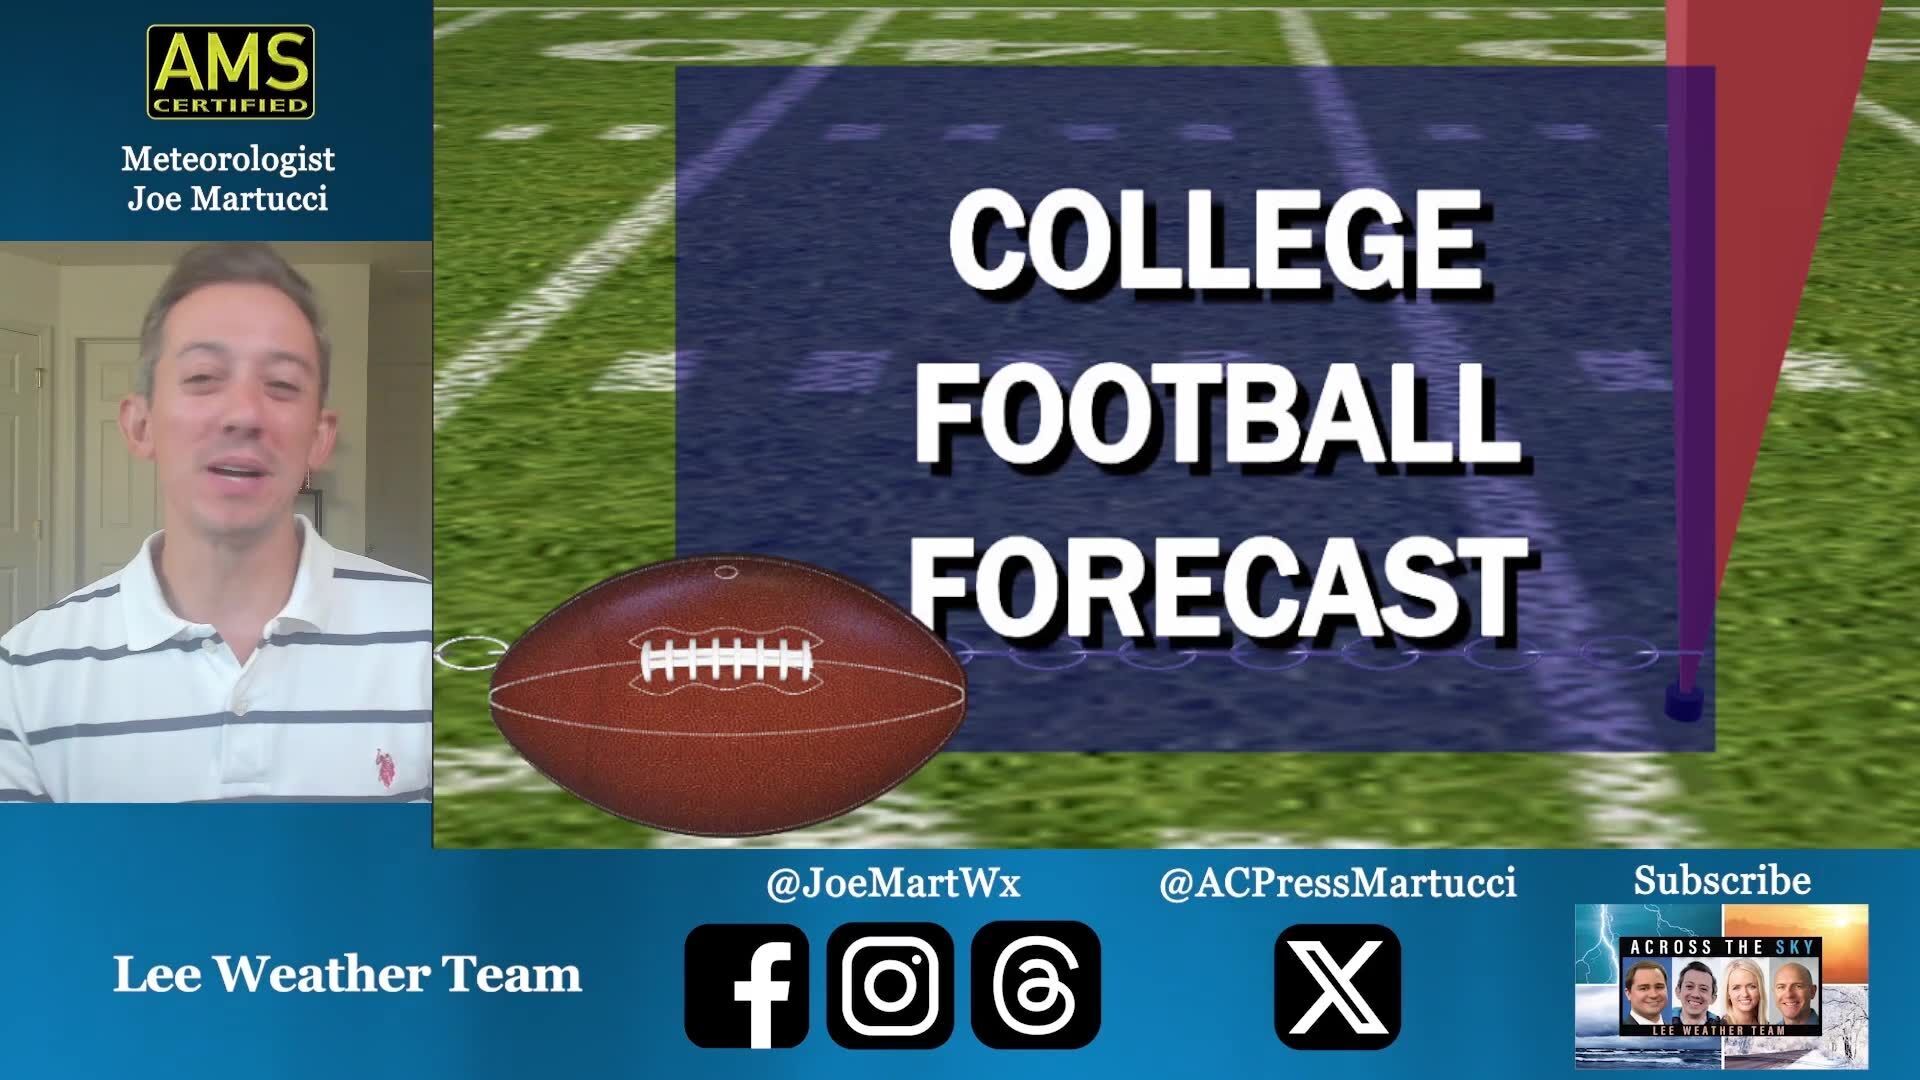 Joe Martucci has the weather forecast for #16 Oregon State vs